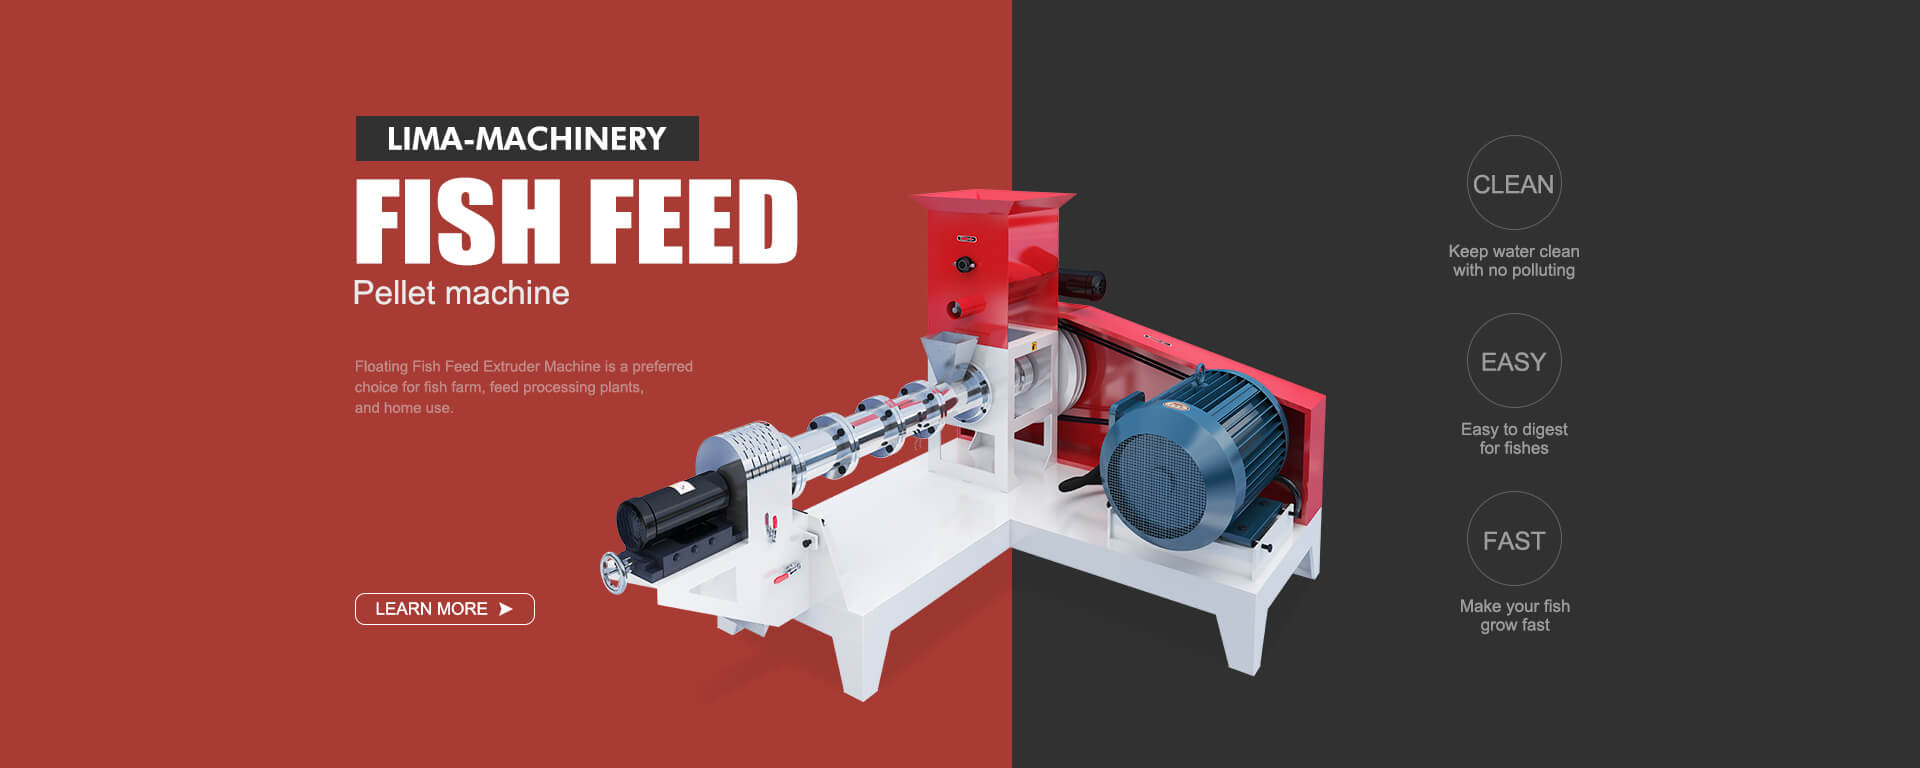 Floating fish feed extruder